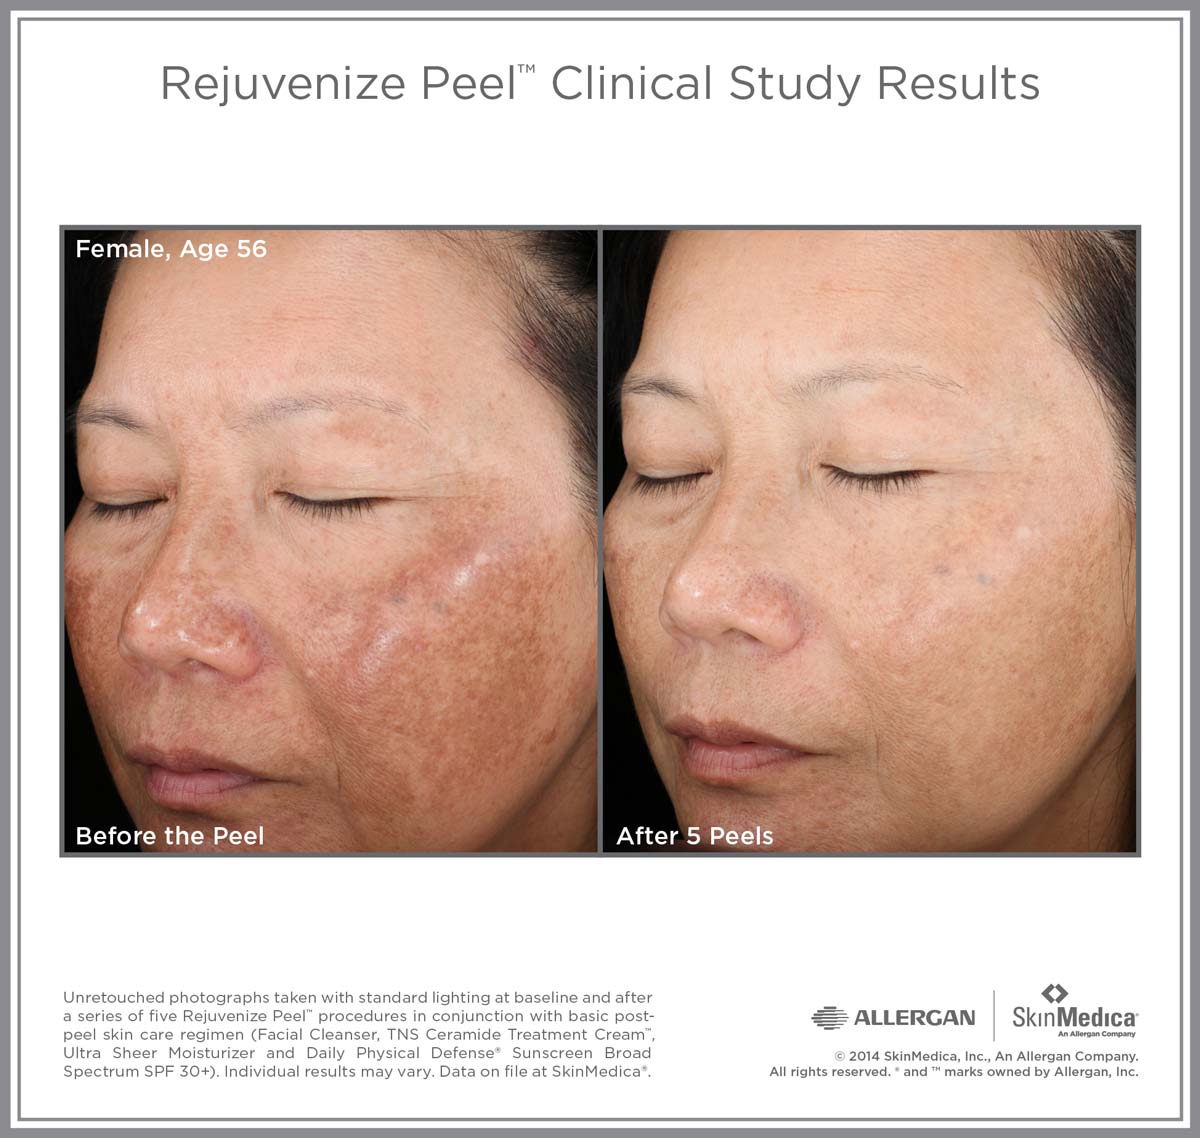 Rejuvenize Peel Clinical Study Results for Female age 56